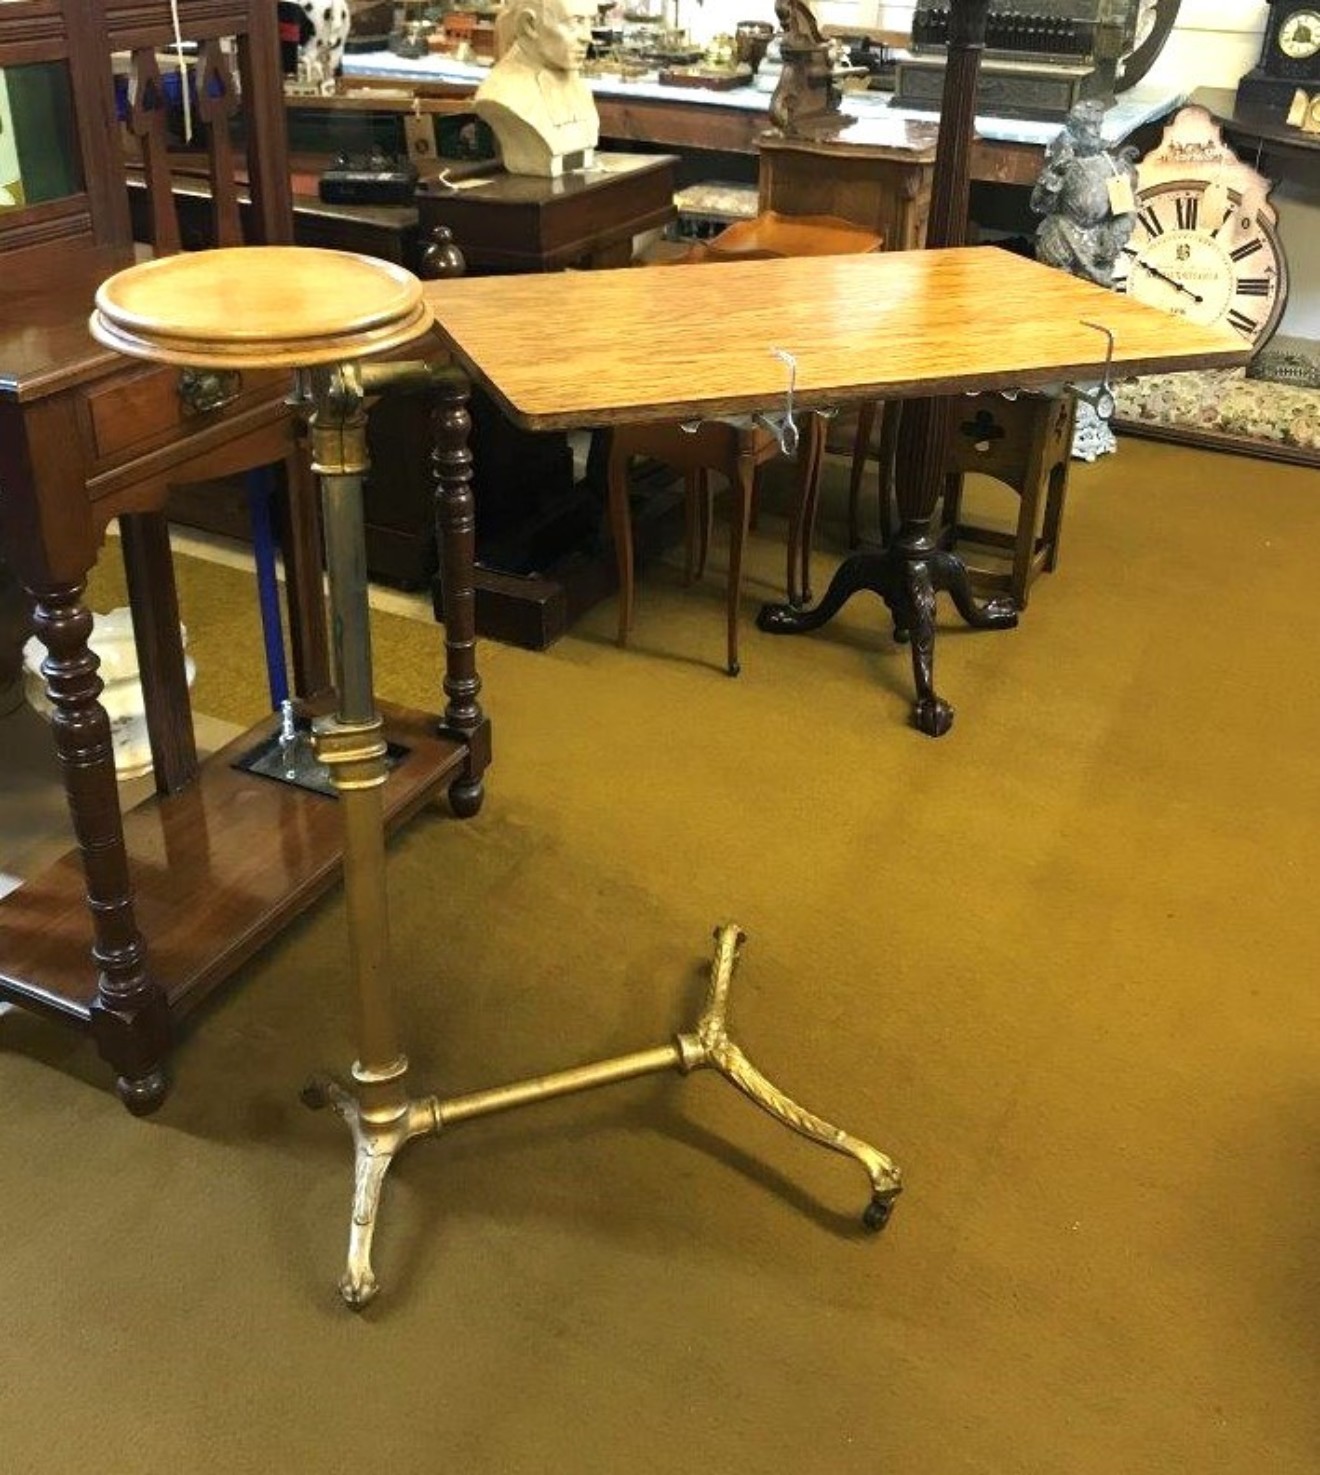 Antique "ADAPTA" Patent Adjustable Overbed / Hospital Table by J Foot & Son Ltd London